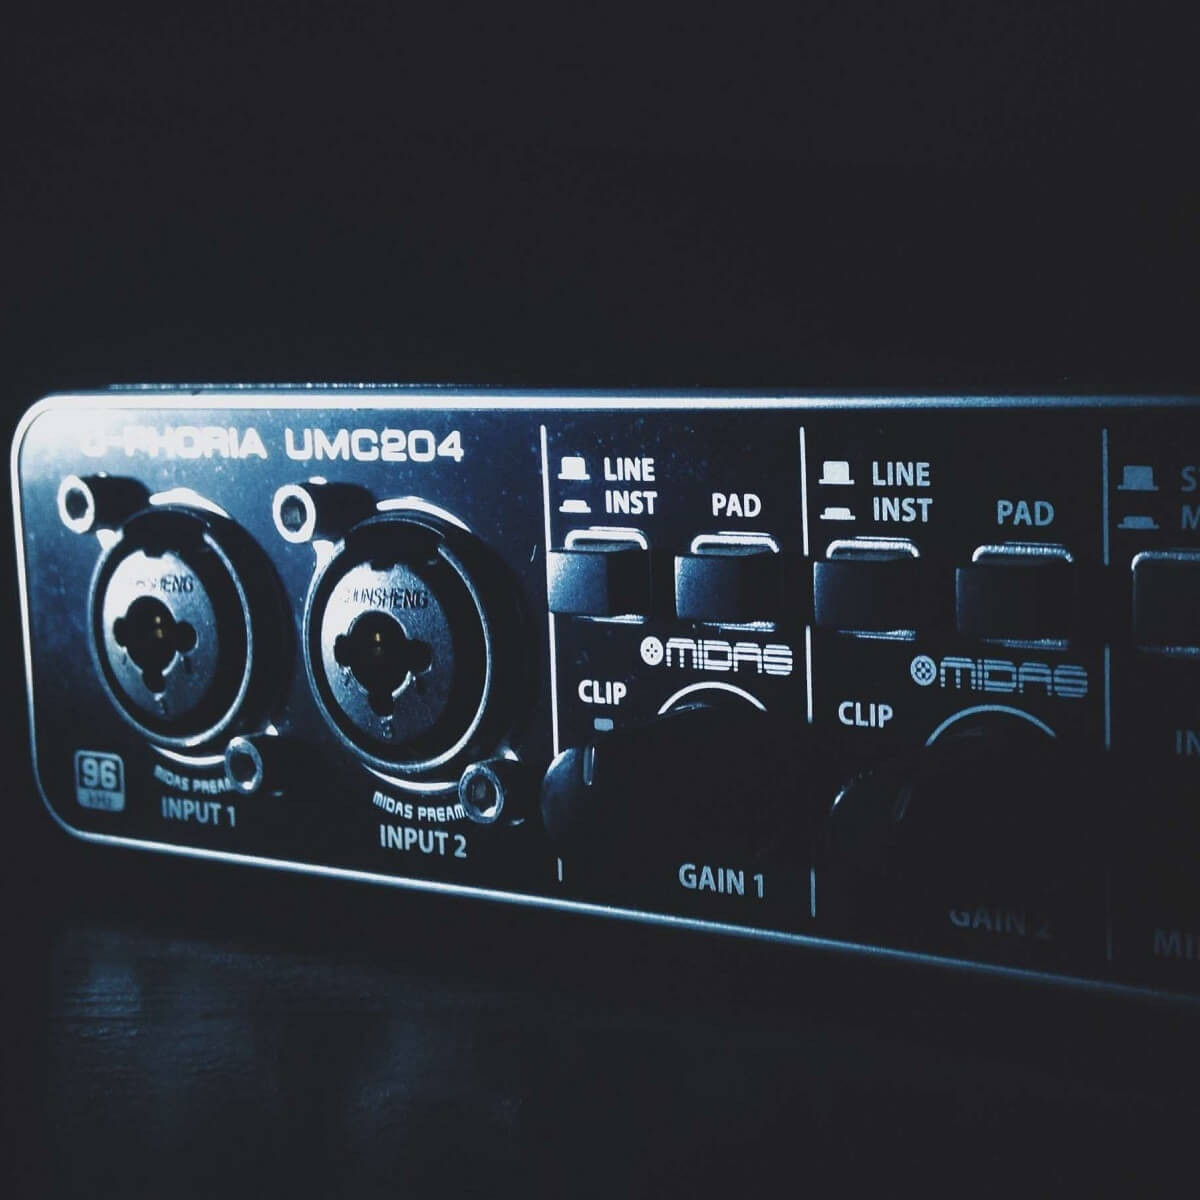 Best USB audio interface for streaming